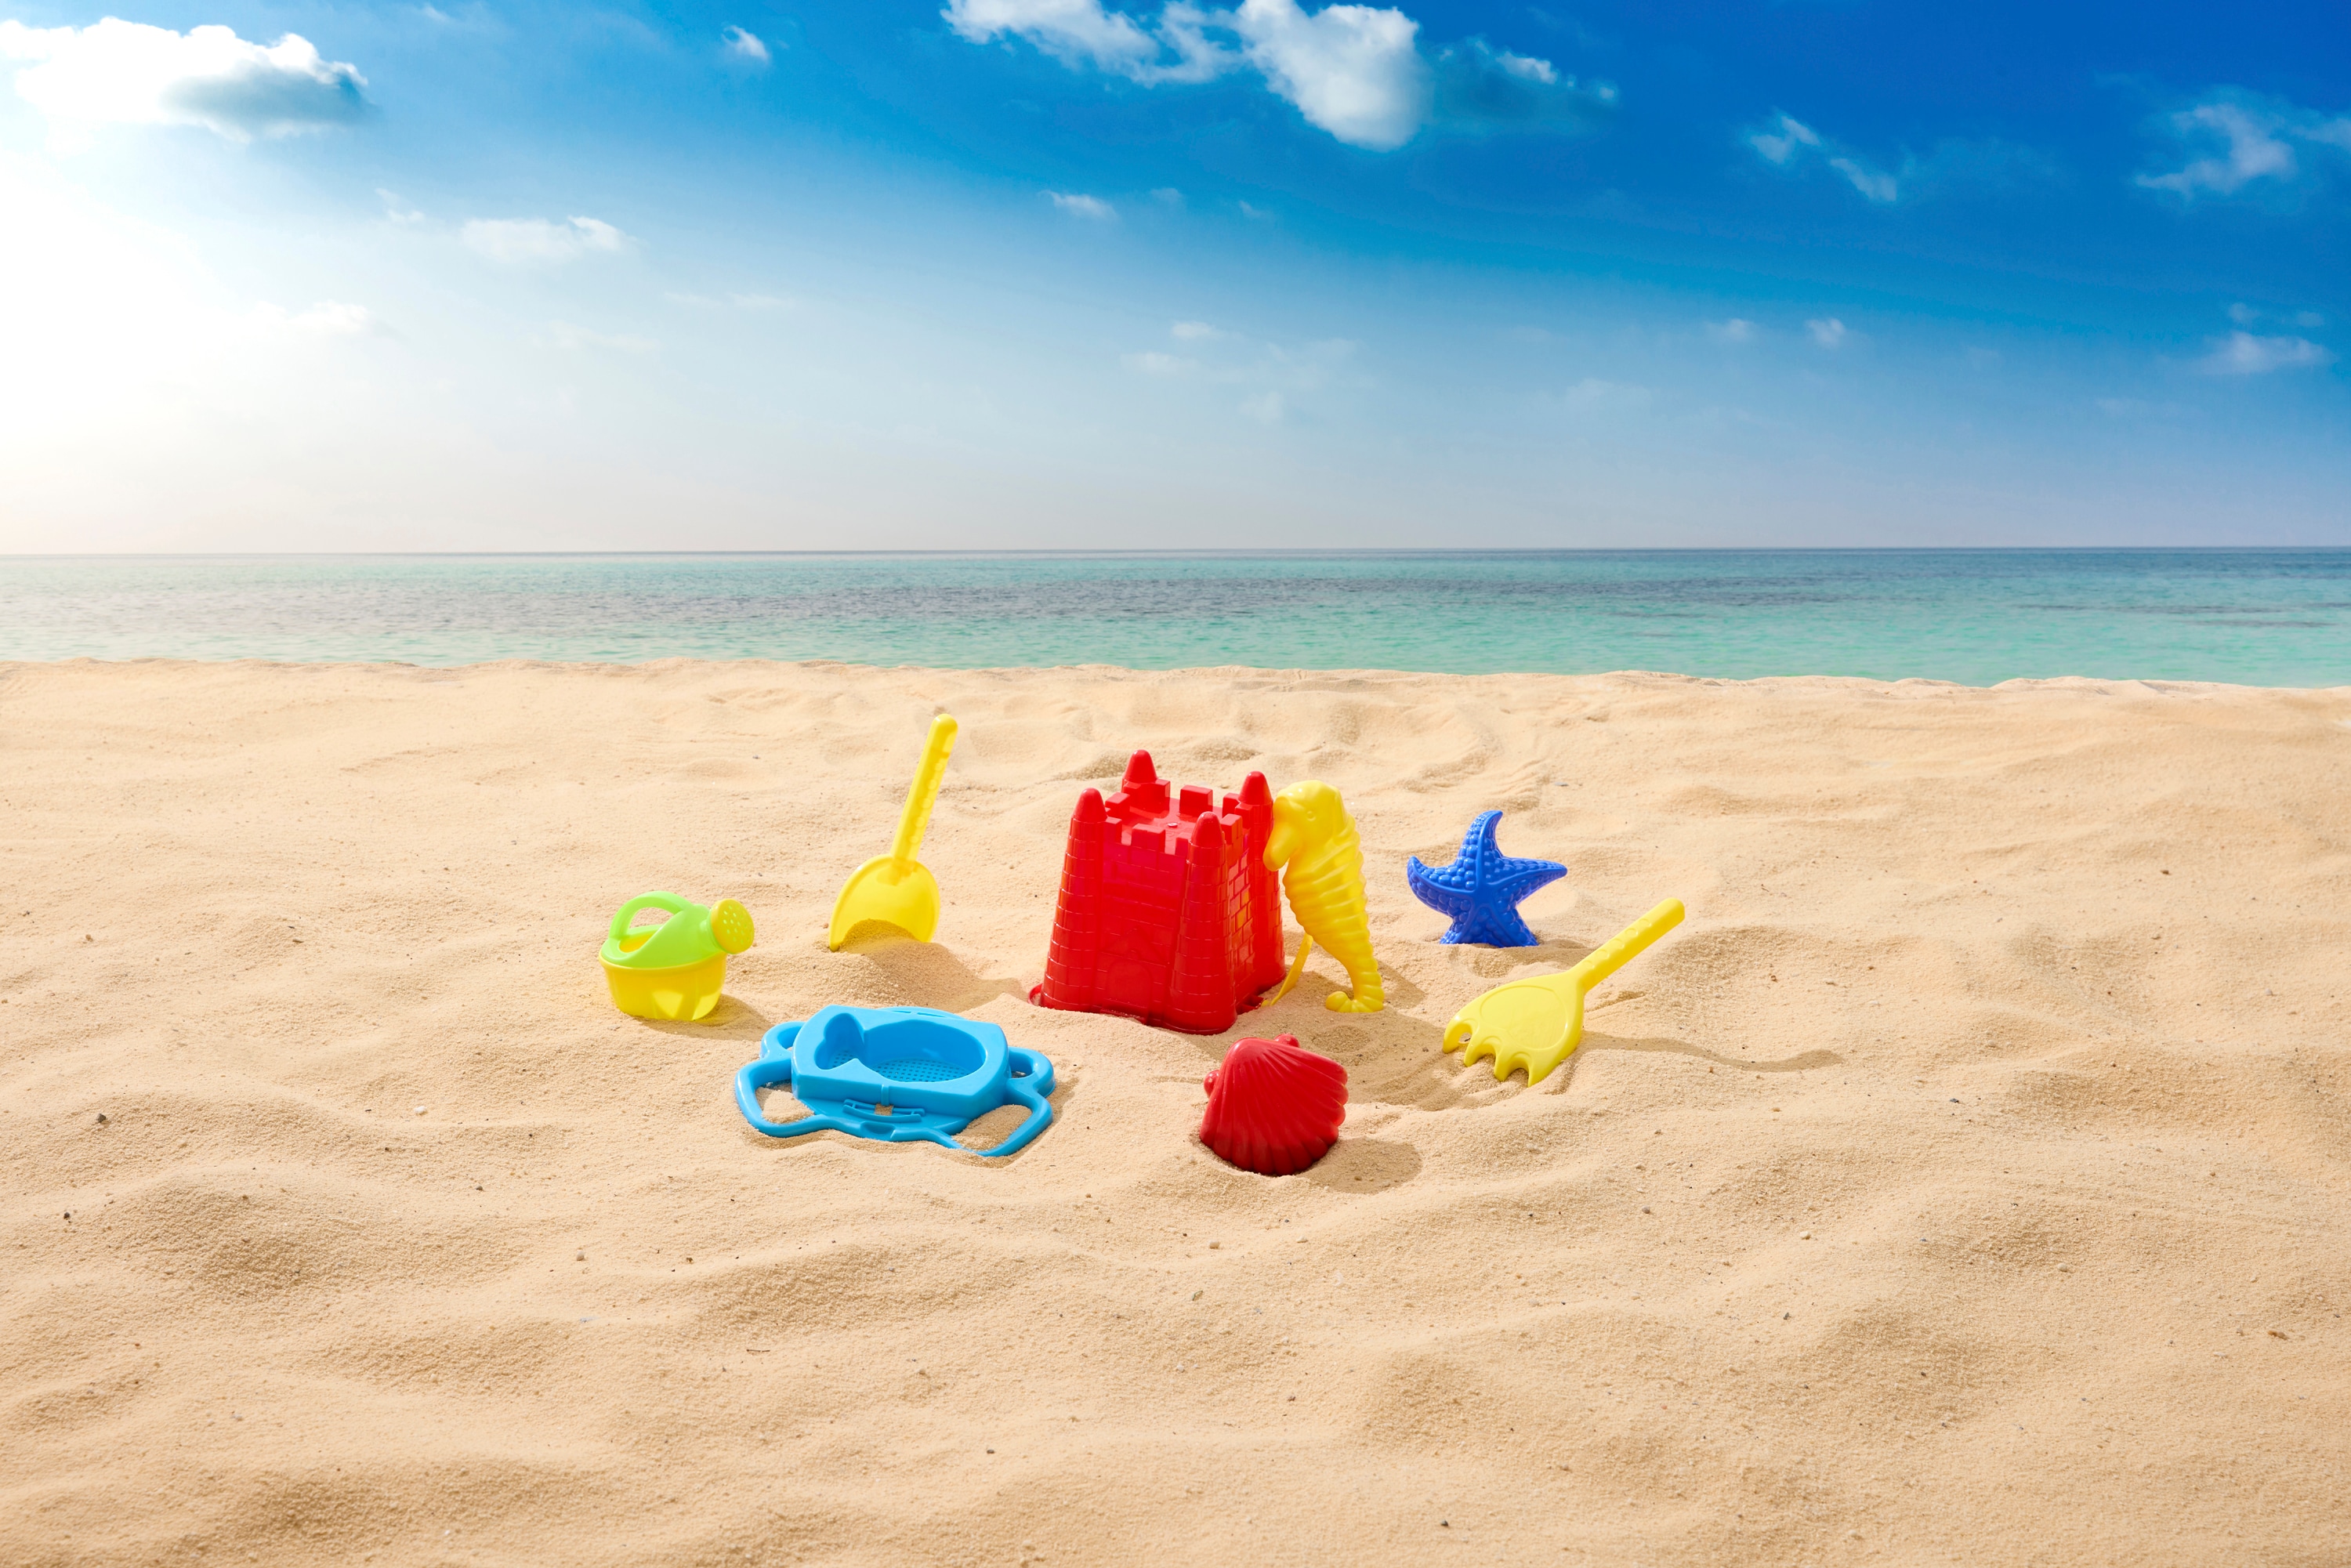 Sand and water Outdoor Games & Toys at